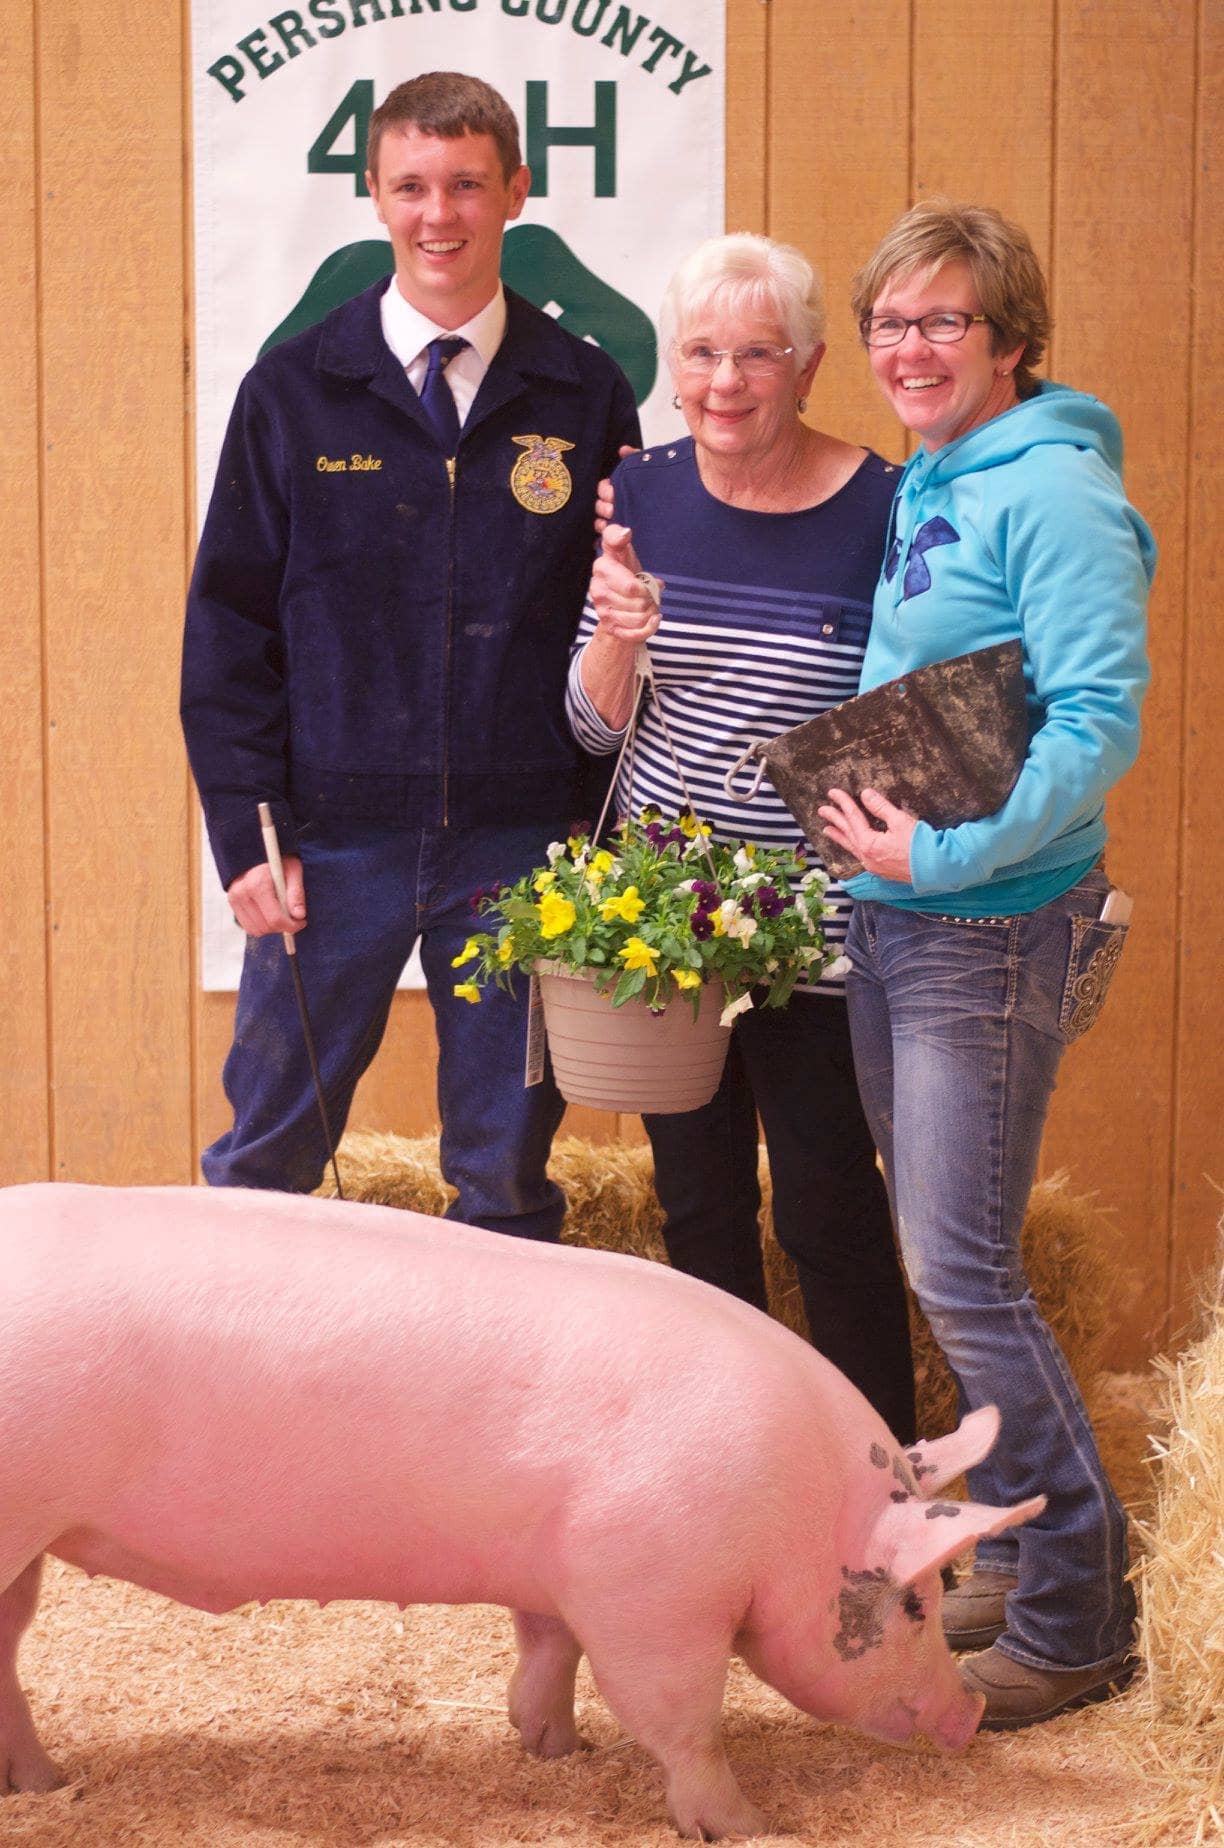 Owen Bake, Sharon Montrose and Shauna Bake stand together in front of a Pershing County 4-H banner and hay bale next to an impressive pink pig.